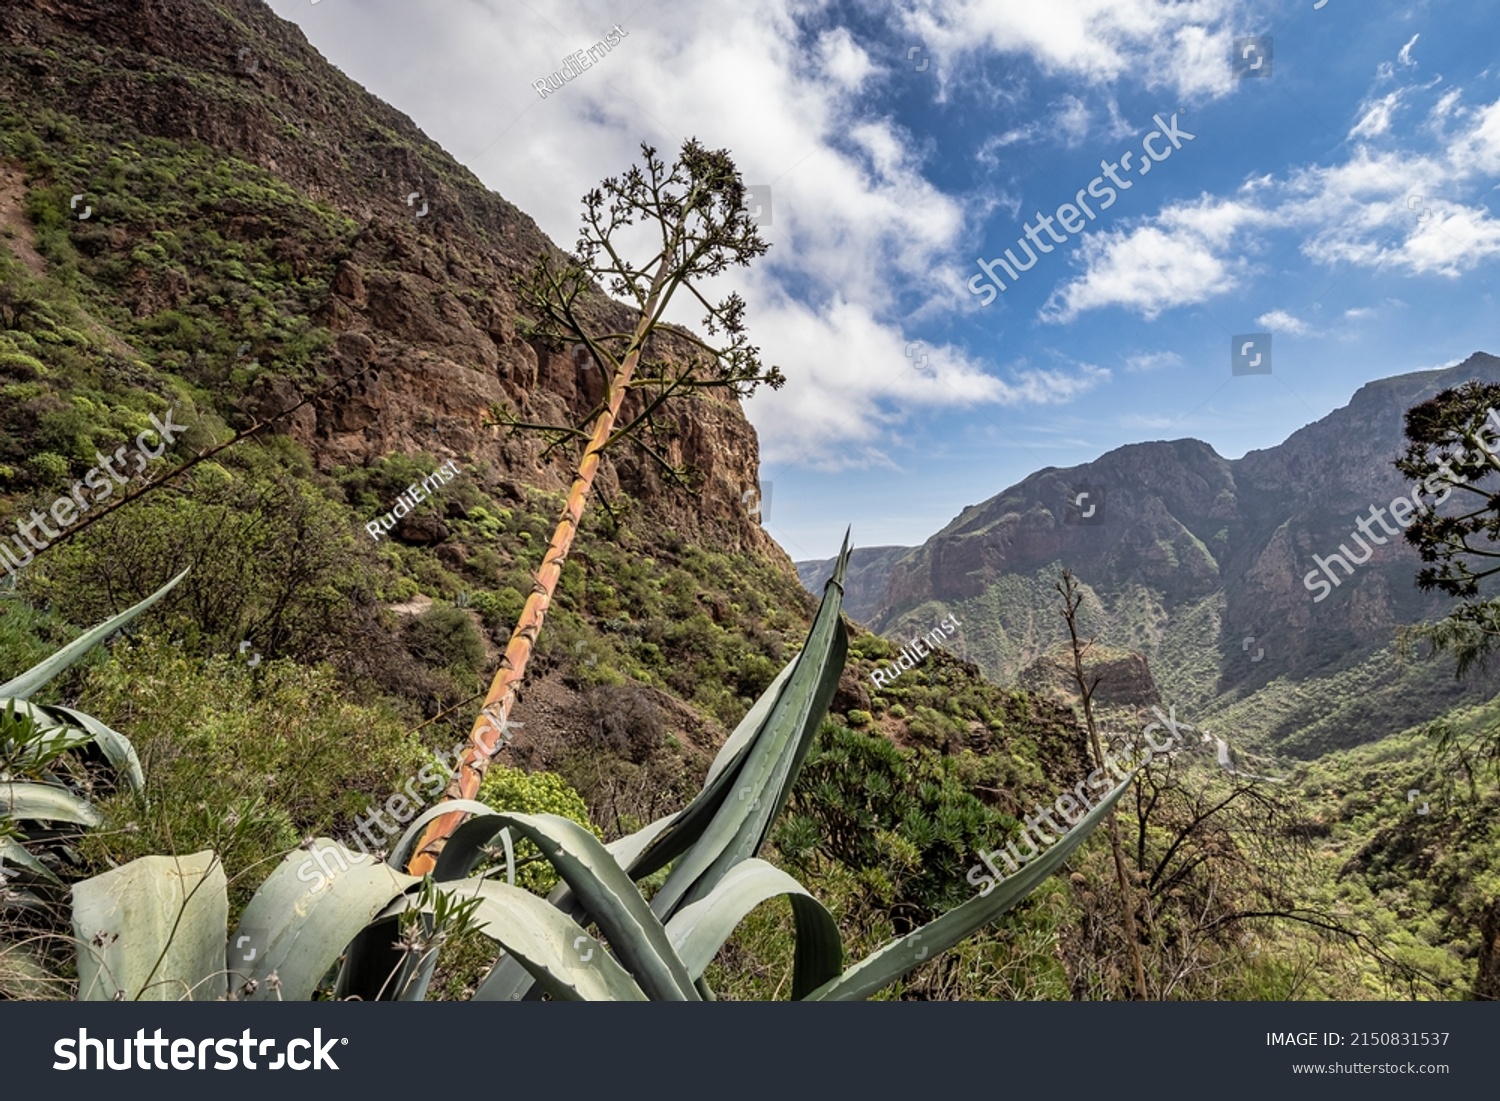 Hiking from Barranco de Guayadeque to Caldera de los Marteles, a volcanic area with dry fields at the bottom, Gran Canaria, Canary Island, Spain, Europe #2150831537